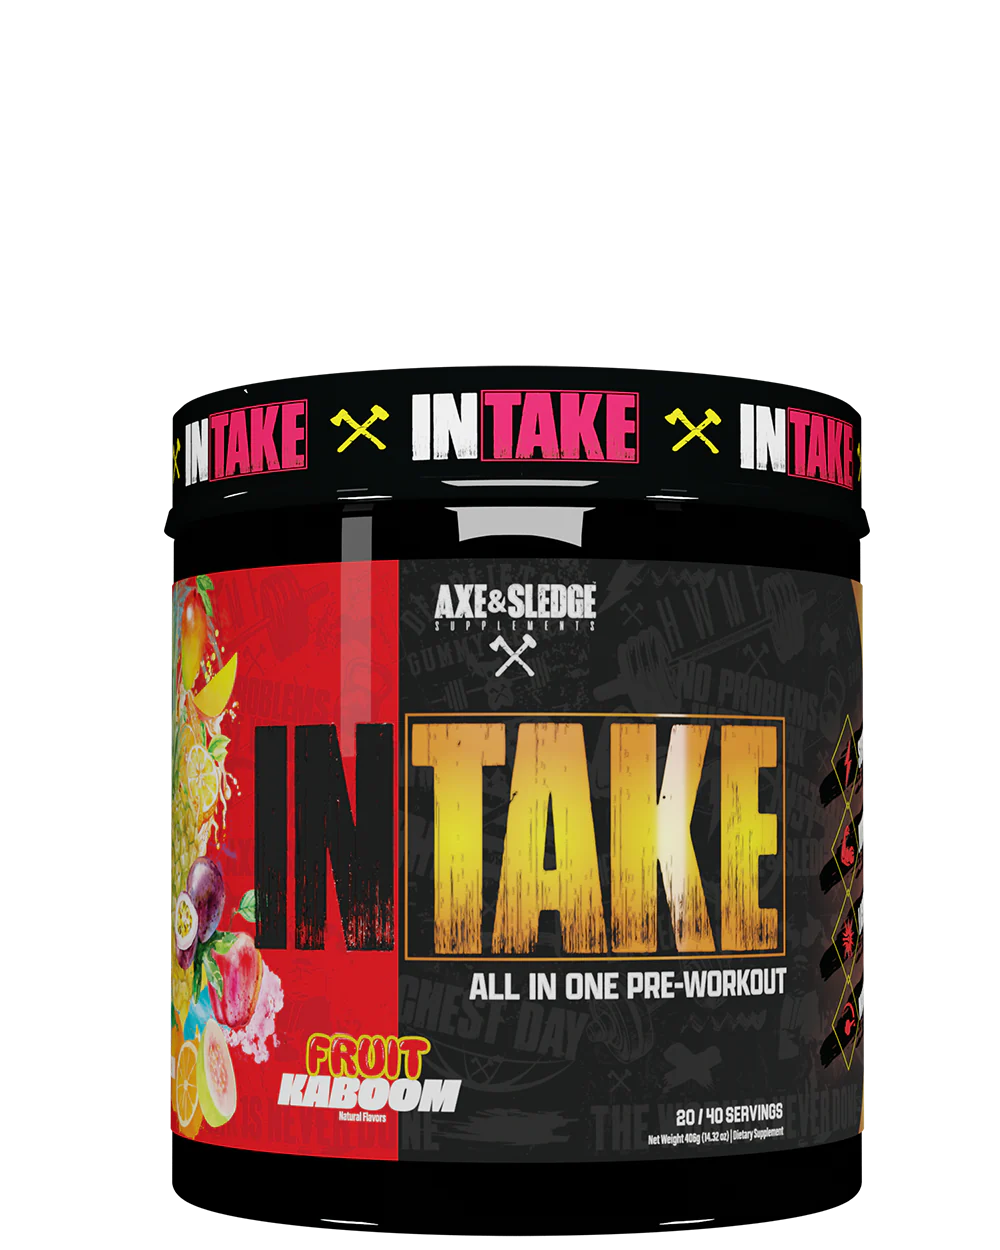 Axe & Sledge INTAKE // ALL-IN-ONE PRE-WORKOUT